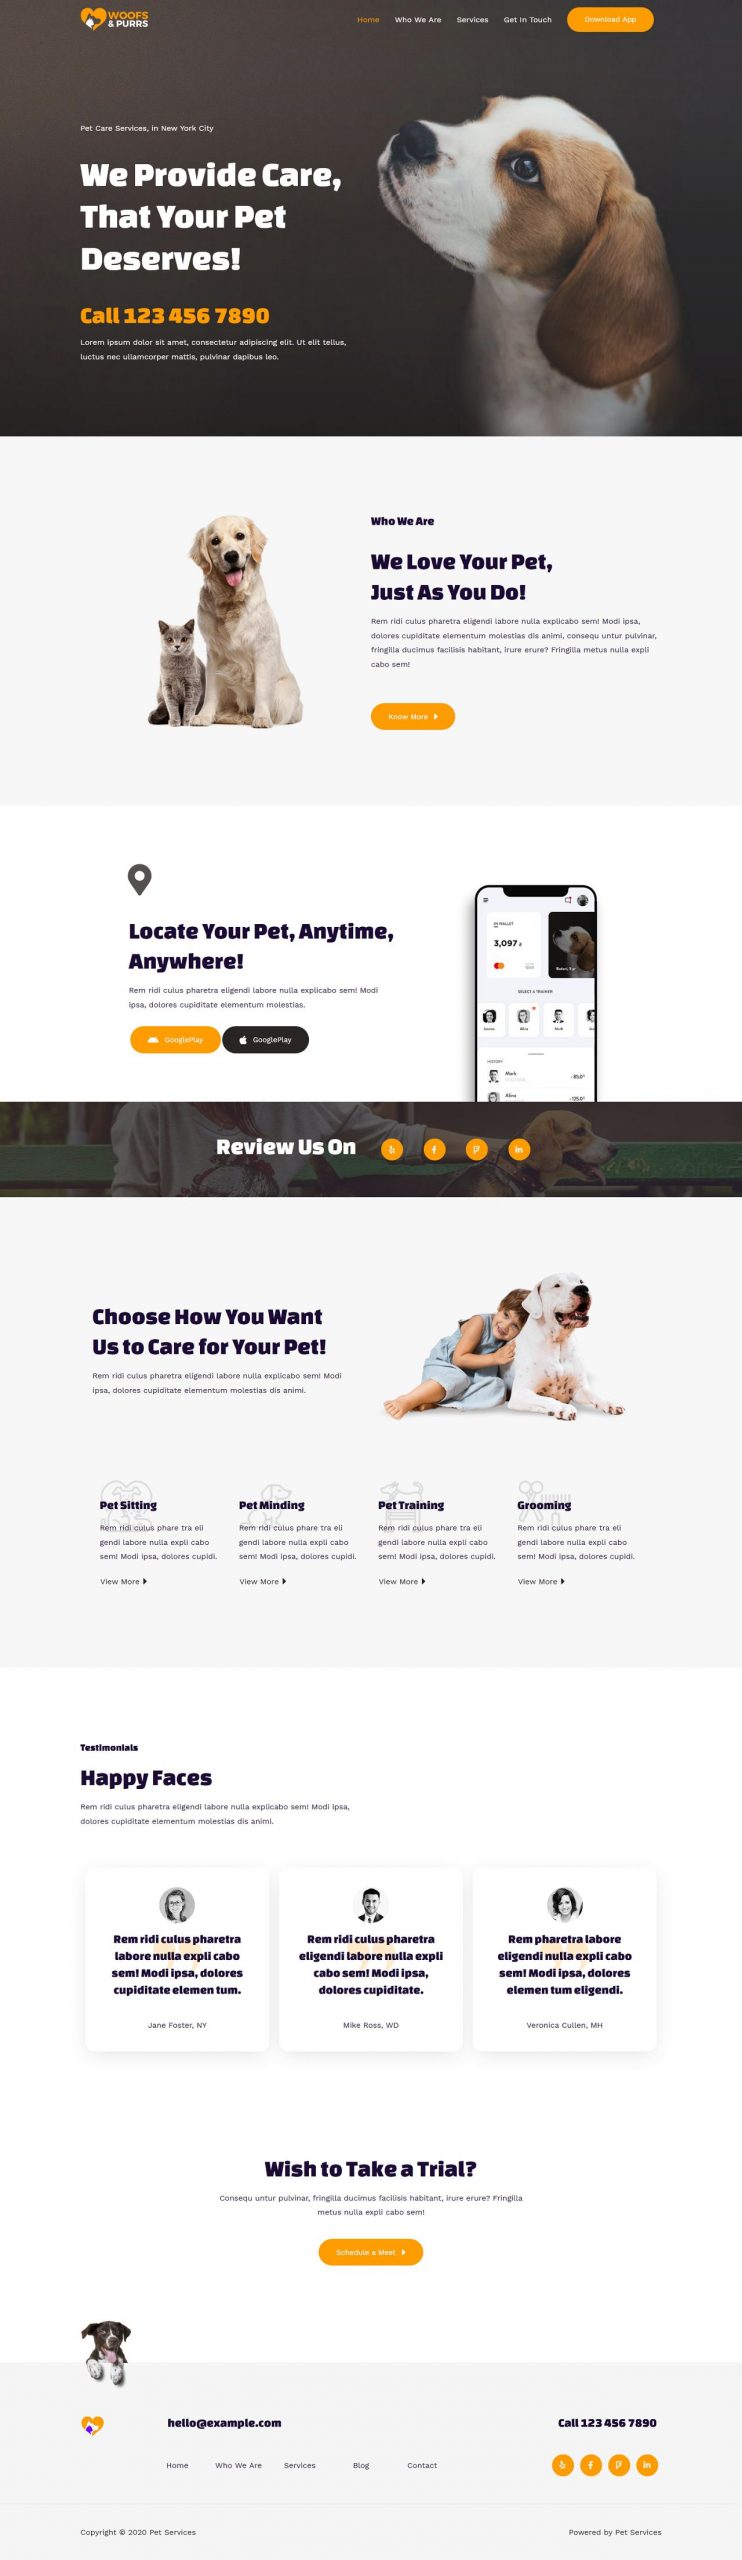 Fagowi.com Website Design Templates For Pet Sitting Services - Home Page Image